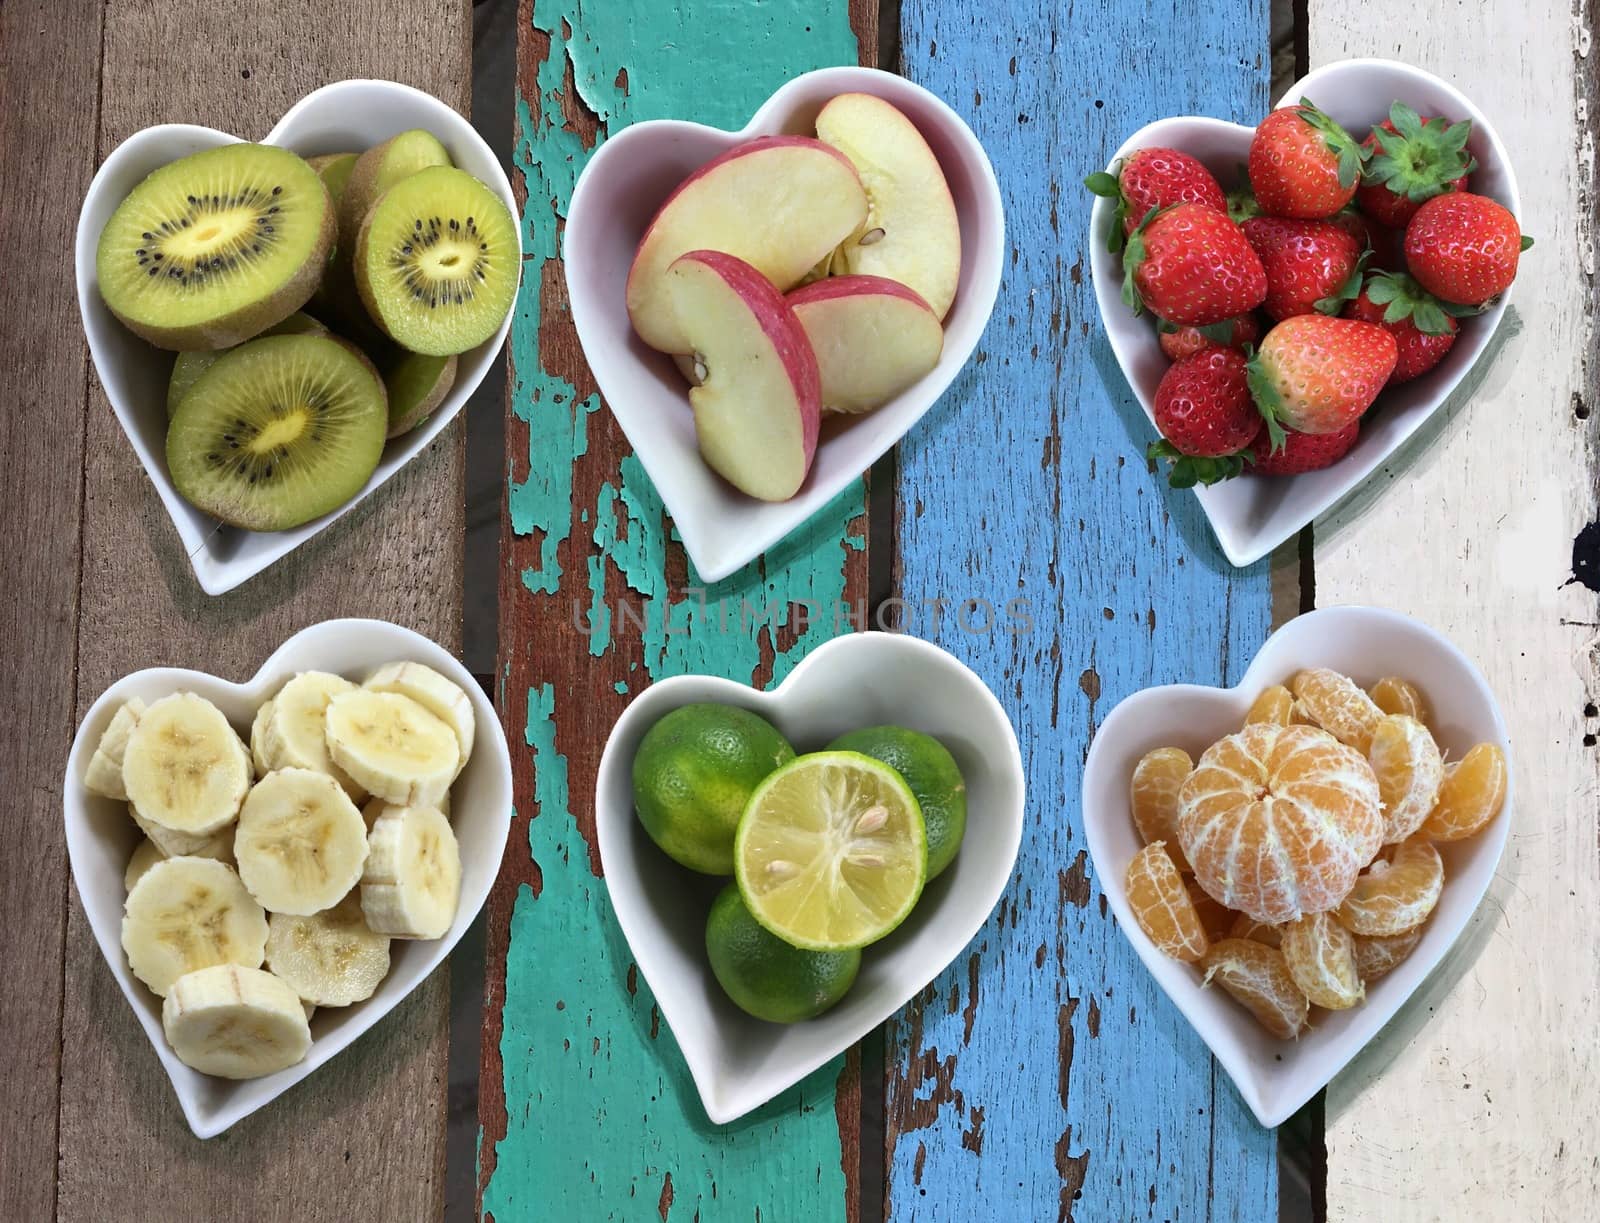 Background of diet food in heart shaped bowls set on old vintage wooden texture.